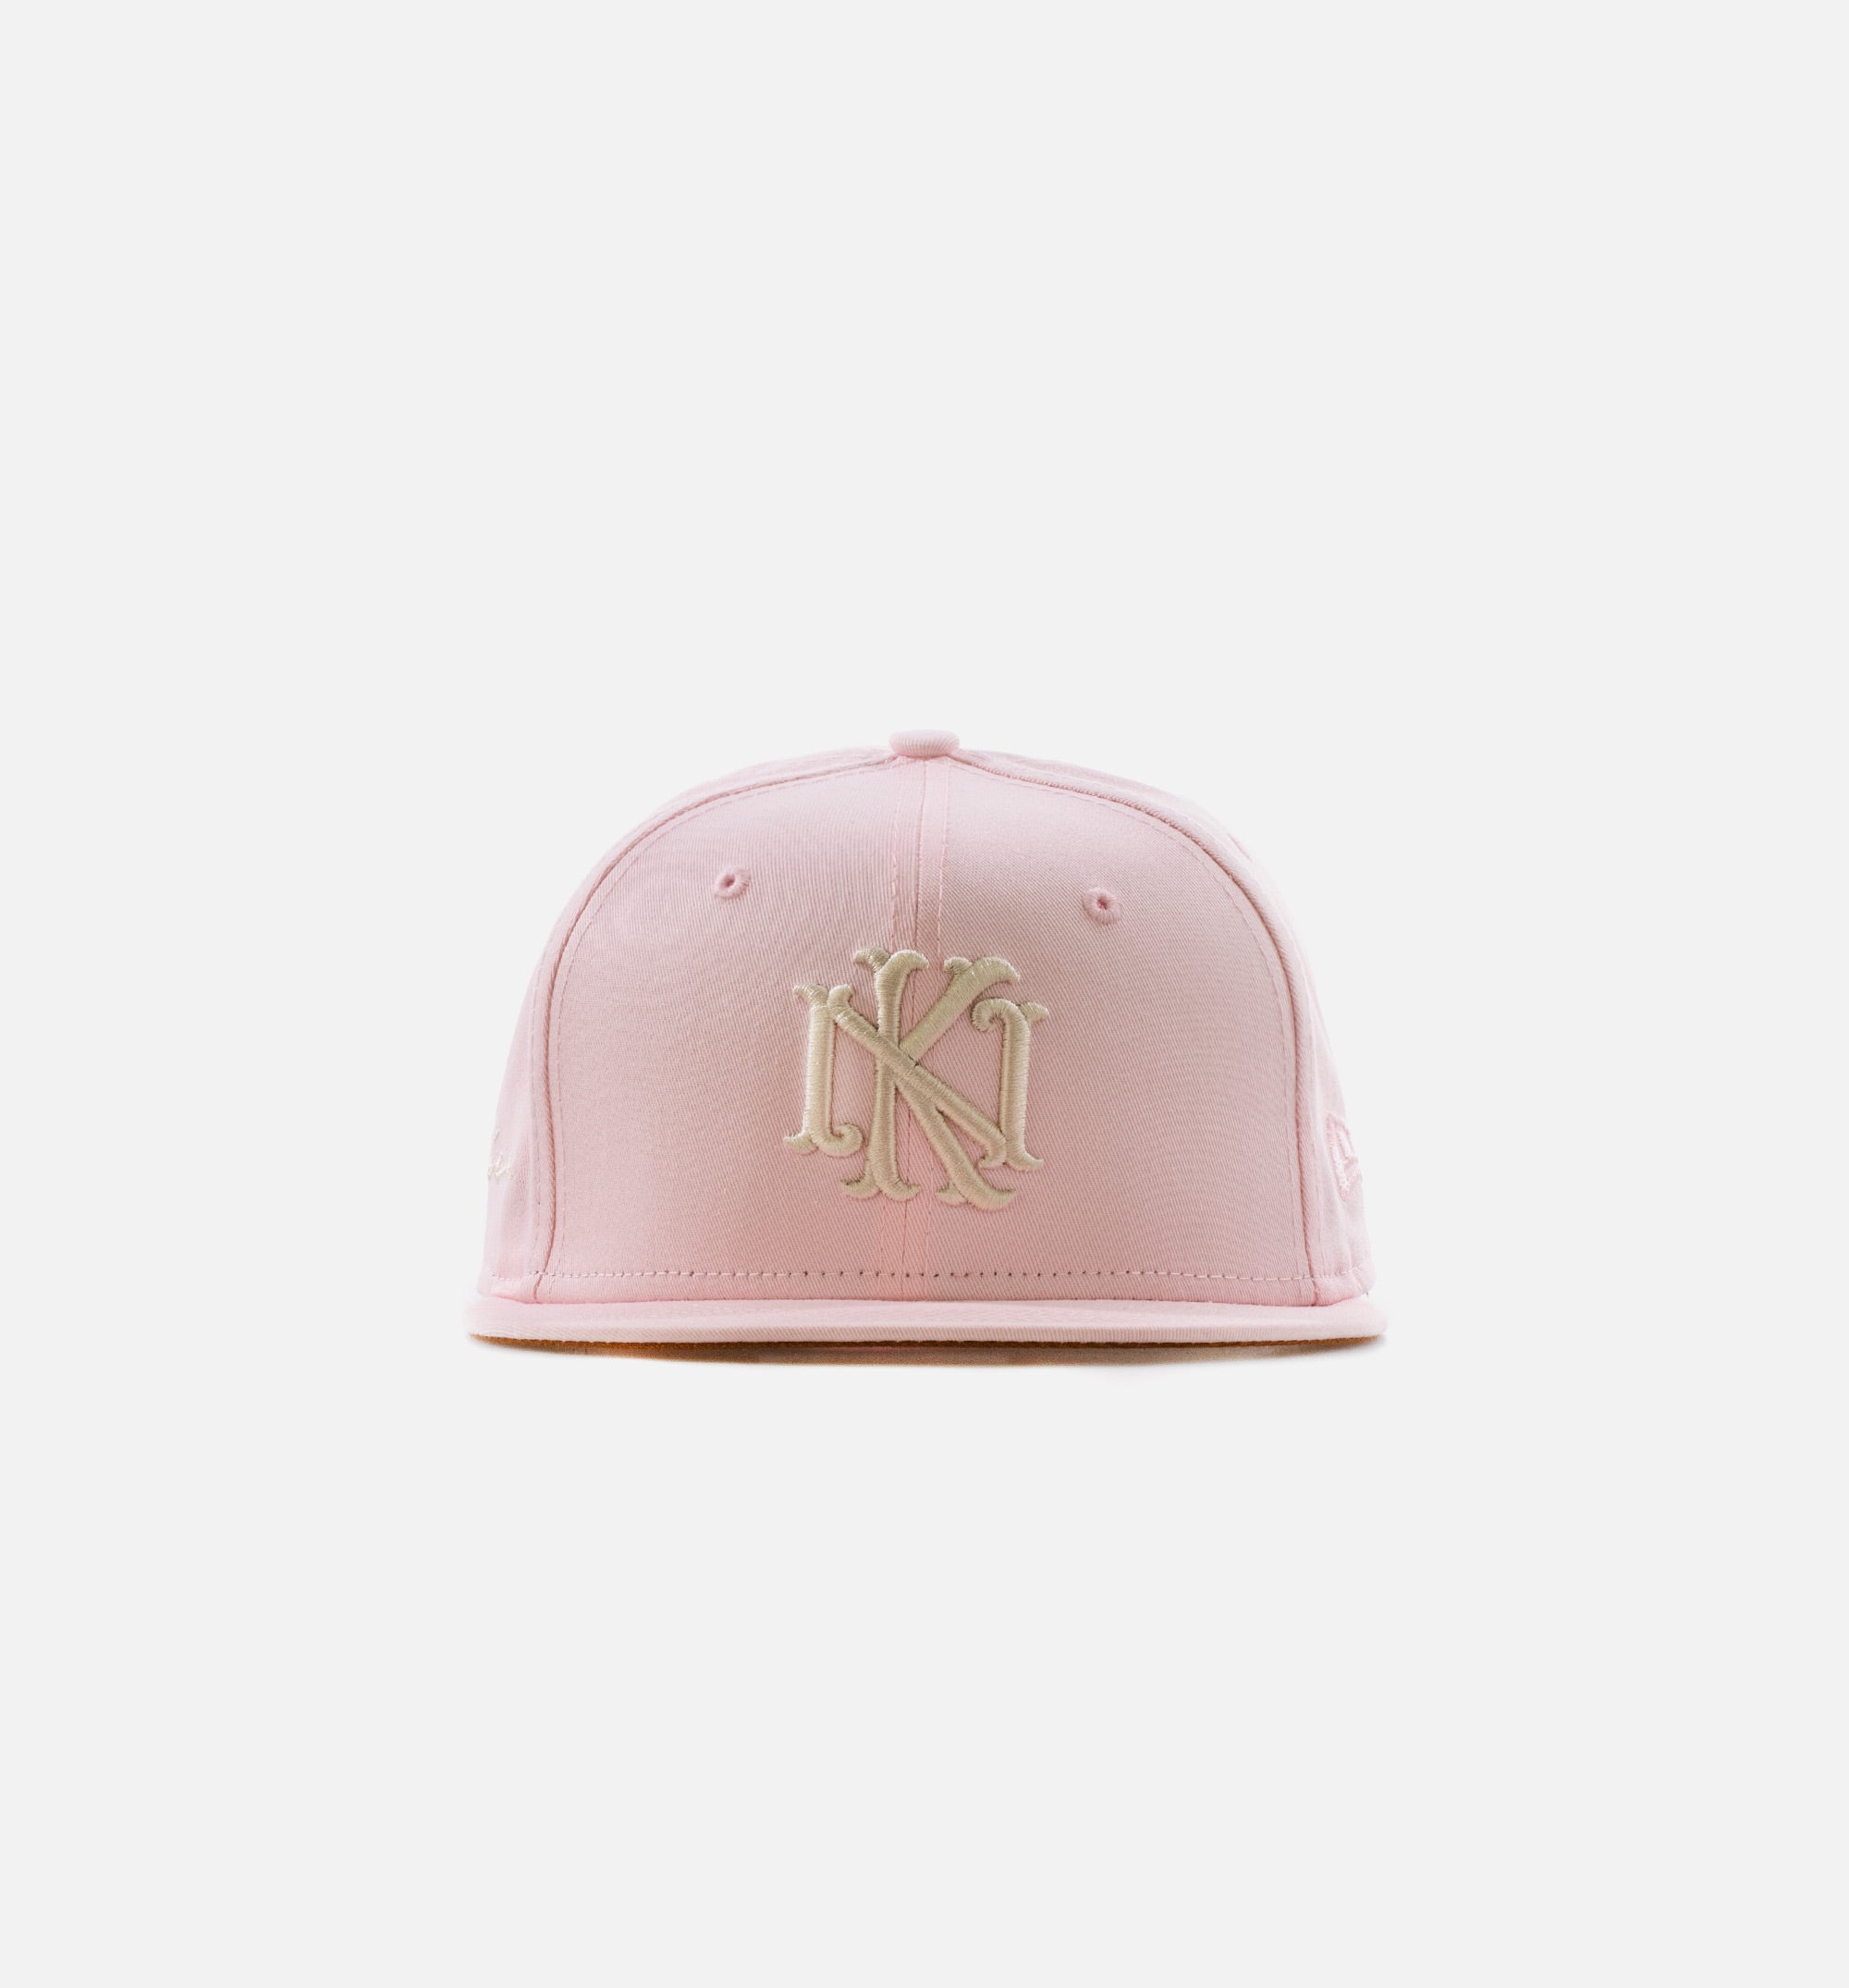 mens pink fitted hat